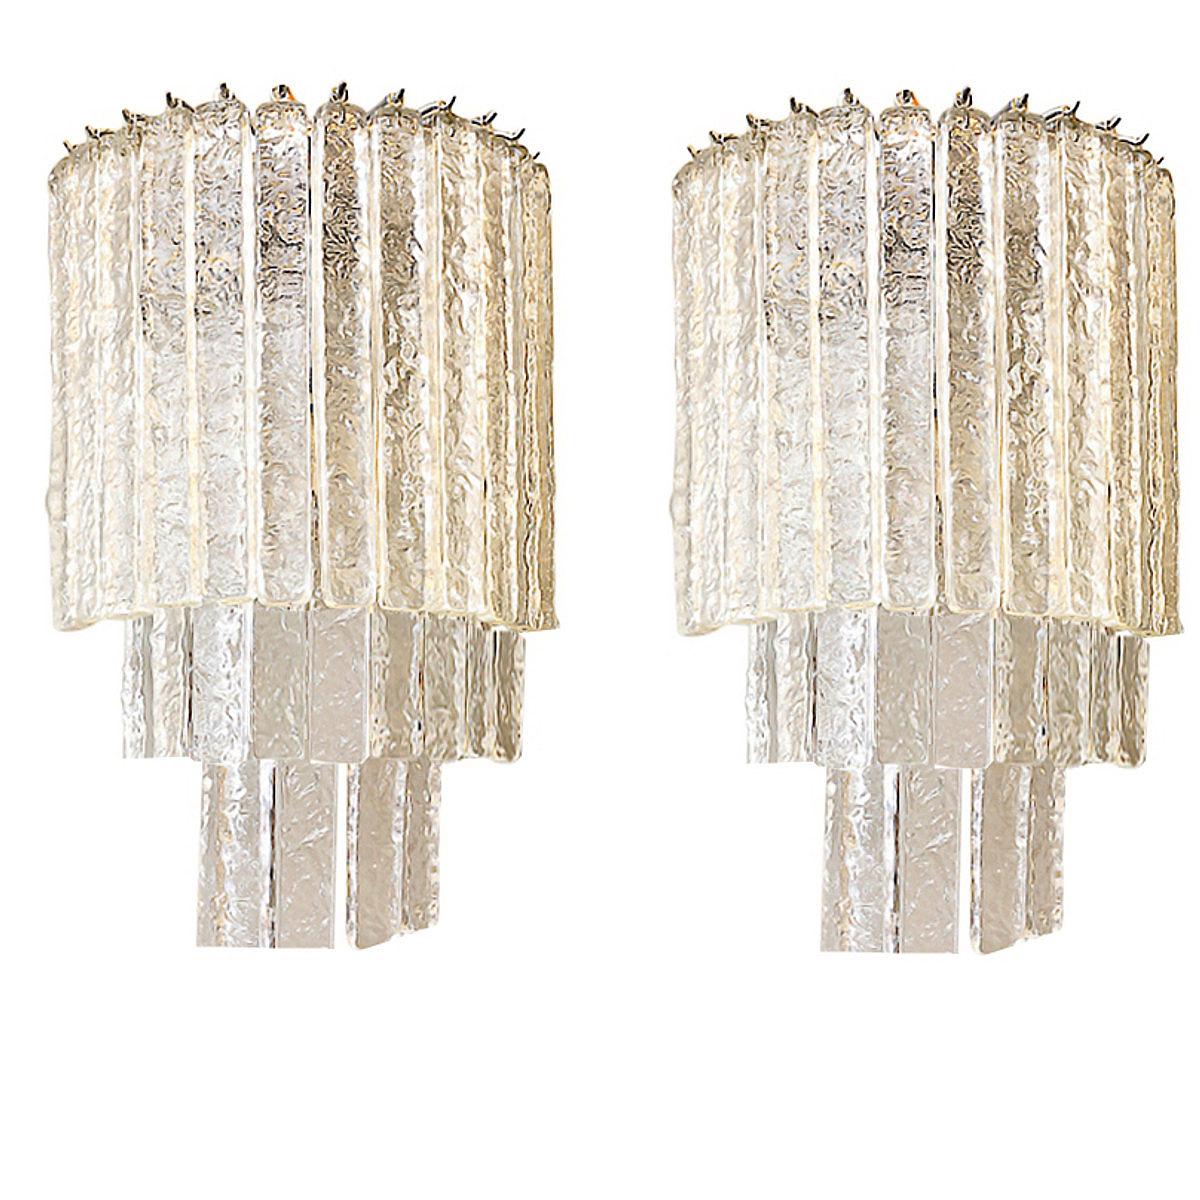 Spectacular pair of Murano glass wall sconces. The glass is designed to look like ice and they cast the most beautiful light.
Fully restored chrome frames and the glass is flawless.